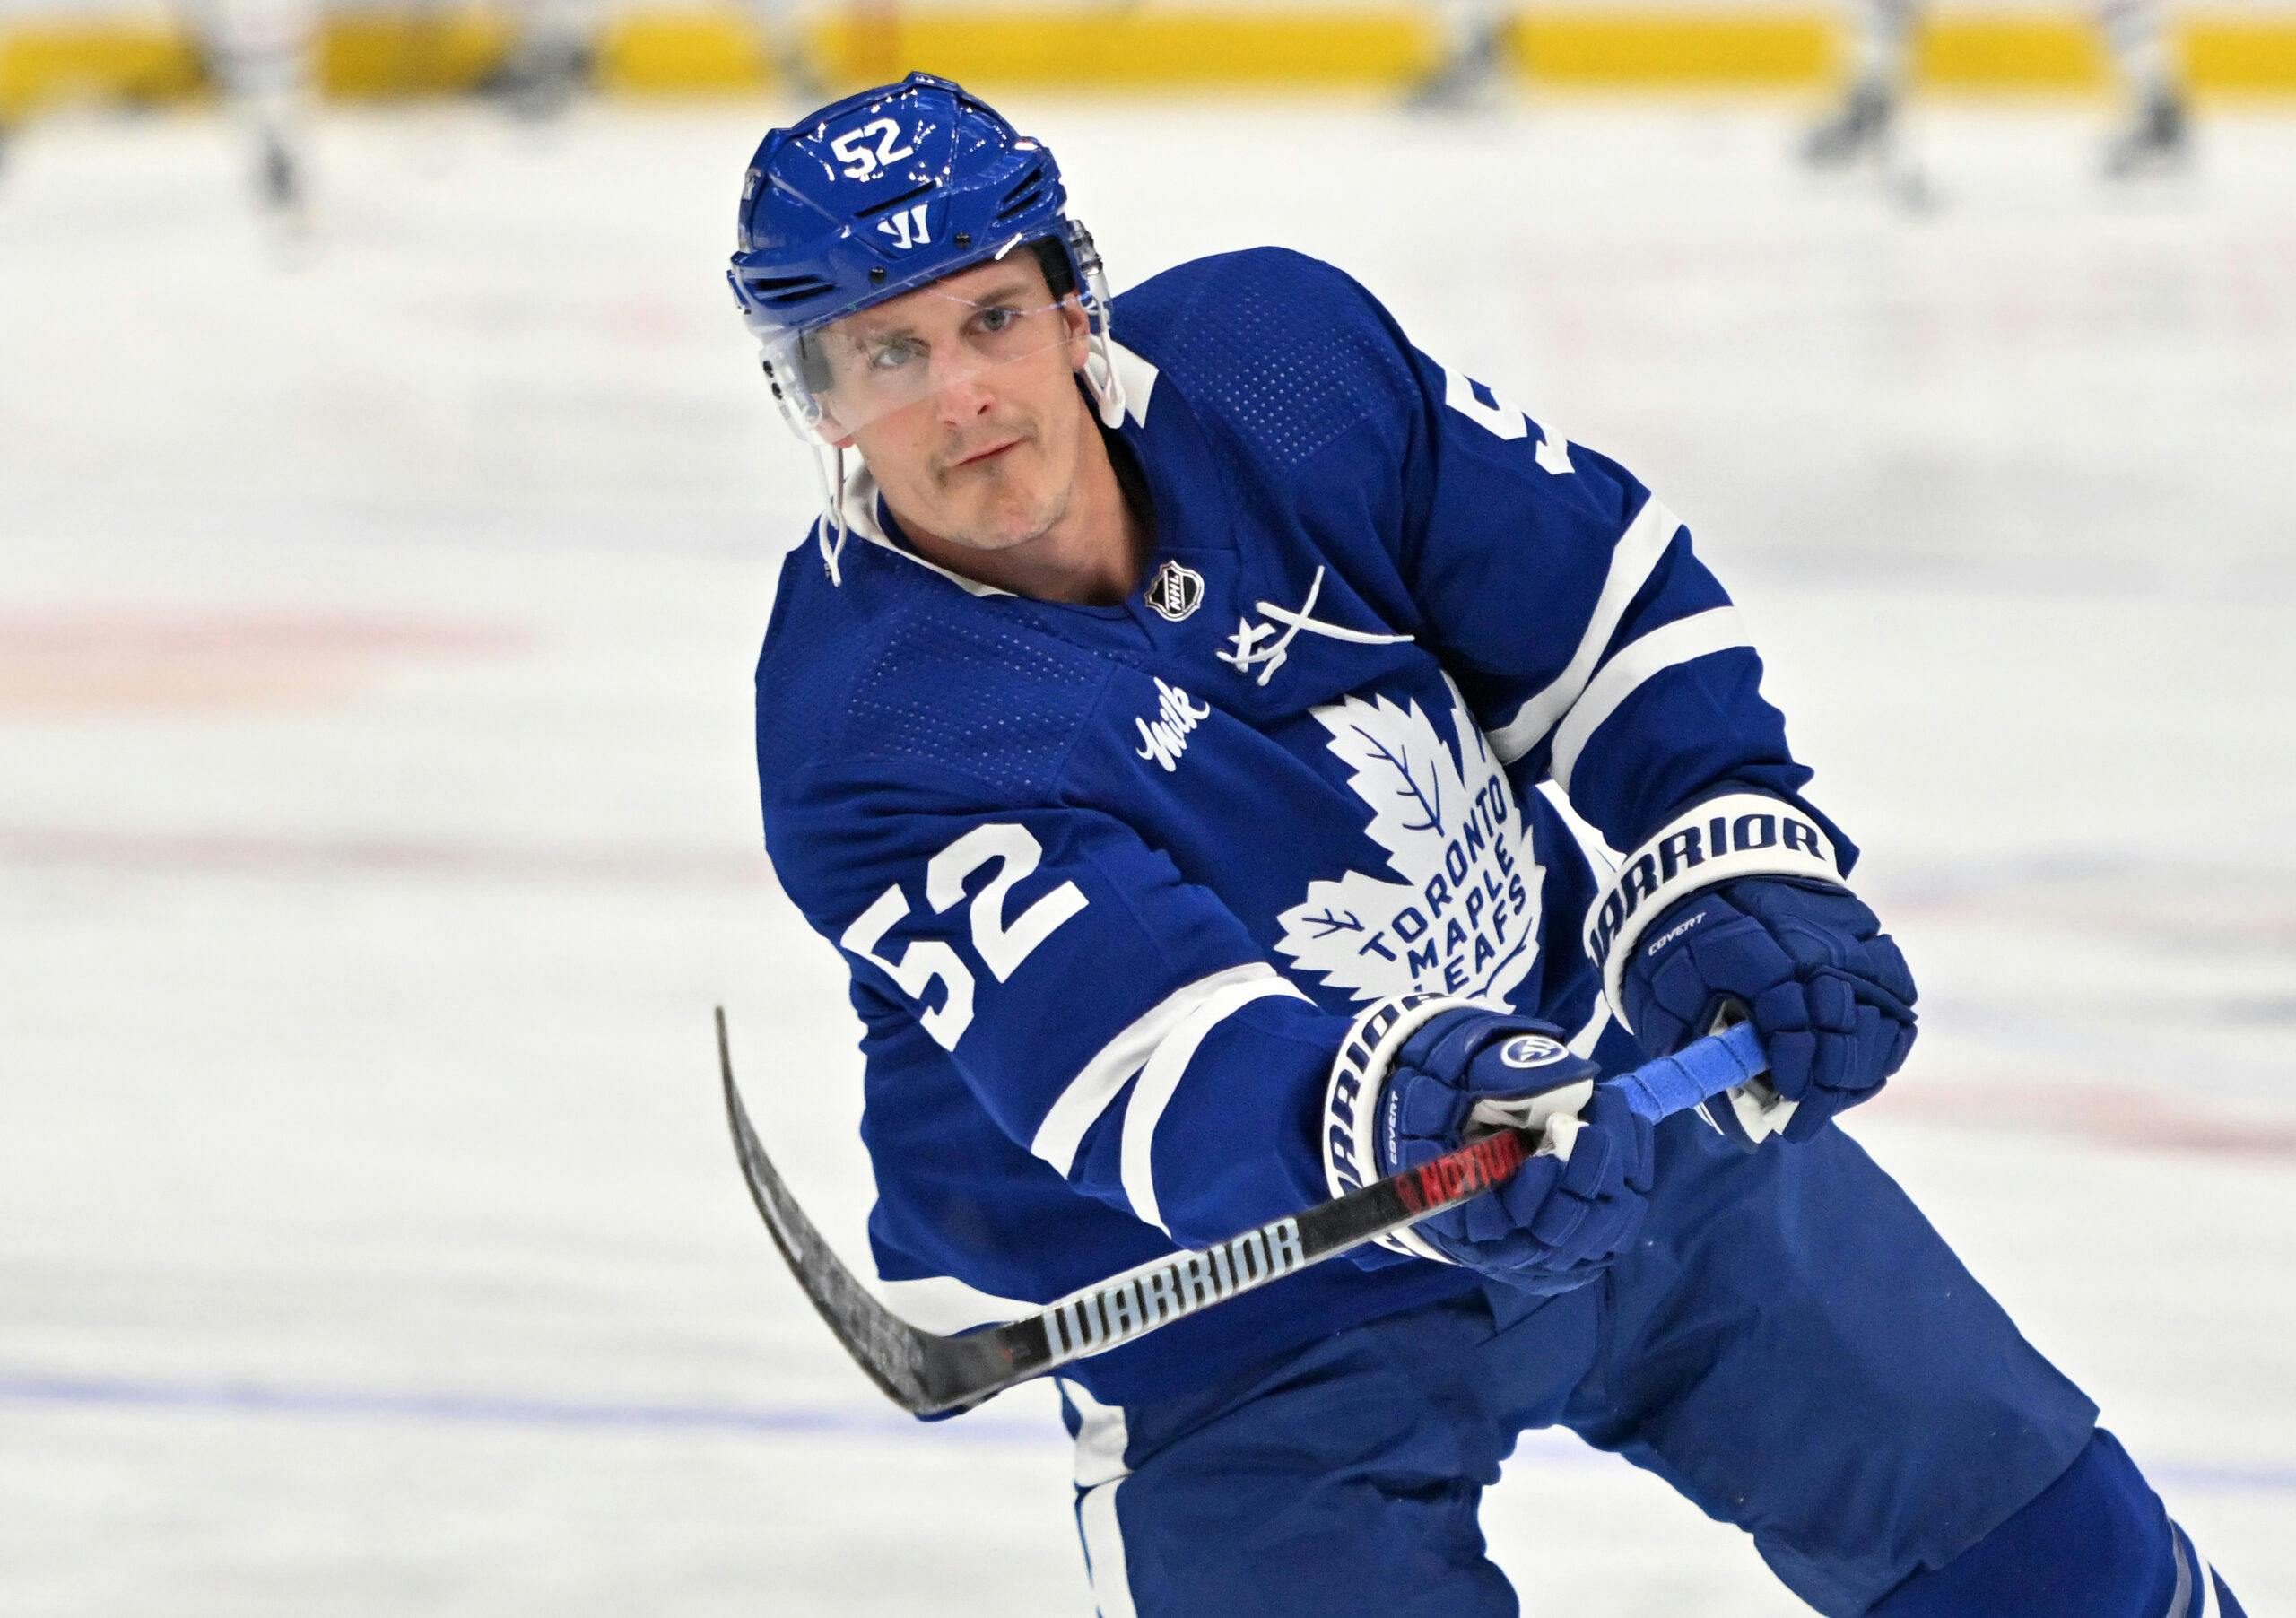 In the trade, the Blues sent O'Reilly and Noel Acciari to Toronto in exchange for forwards Mikhail Abramov and Adam Gaudette, a 2023 first-round draft pick, a 2023 third-round draft pick, and a 2024 second-round draft pick. To make the deal work within Toronto's tight salary cap constraints, both the Blues and the Wild retained 50% of O'Reilly's $7.5 million cap hit, leaving the Leafs responsible for just $3,750,000.